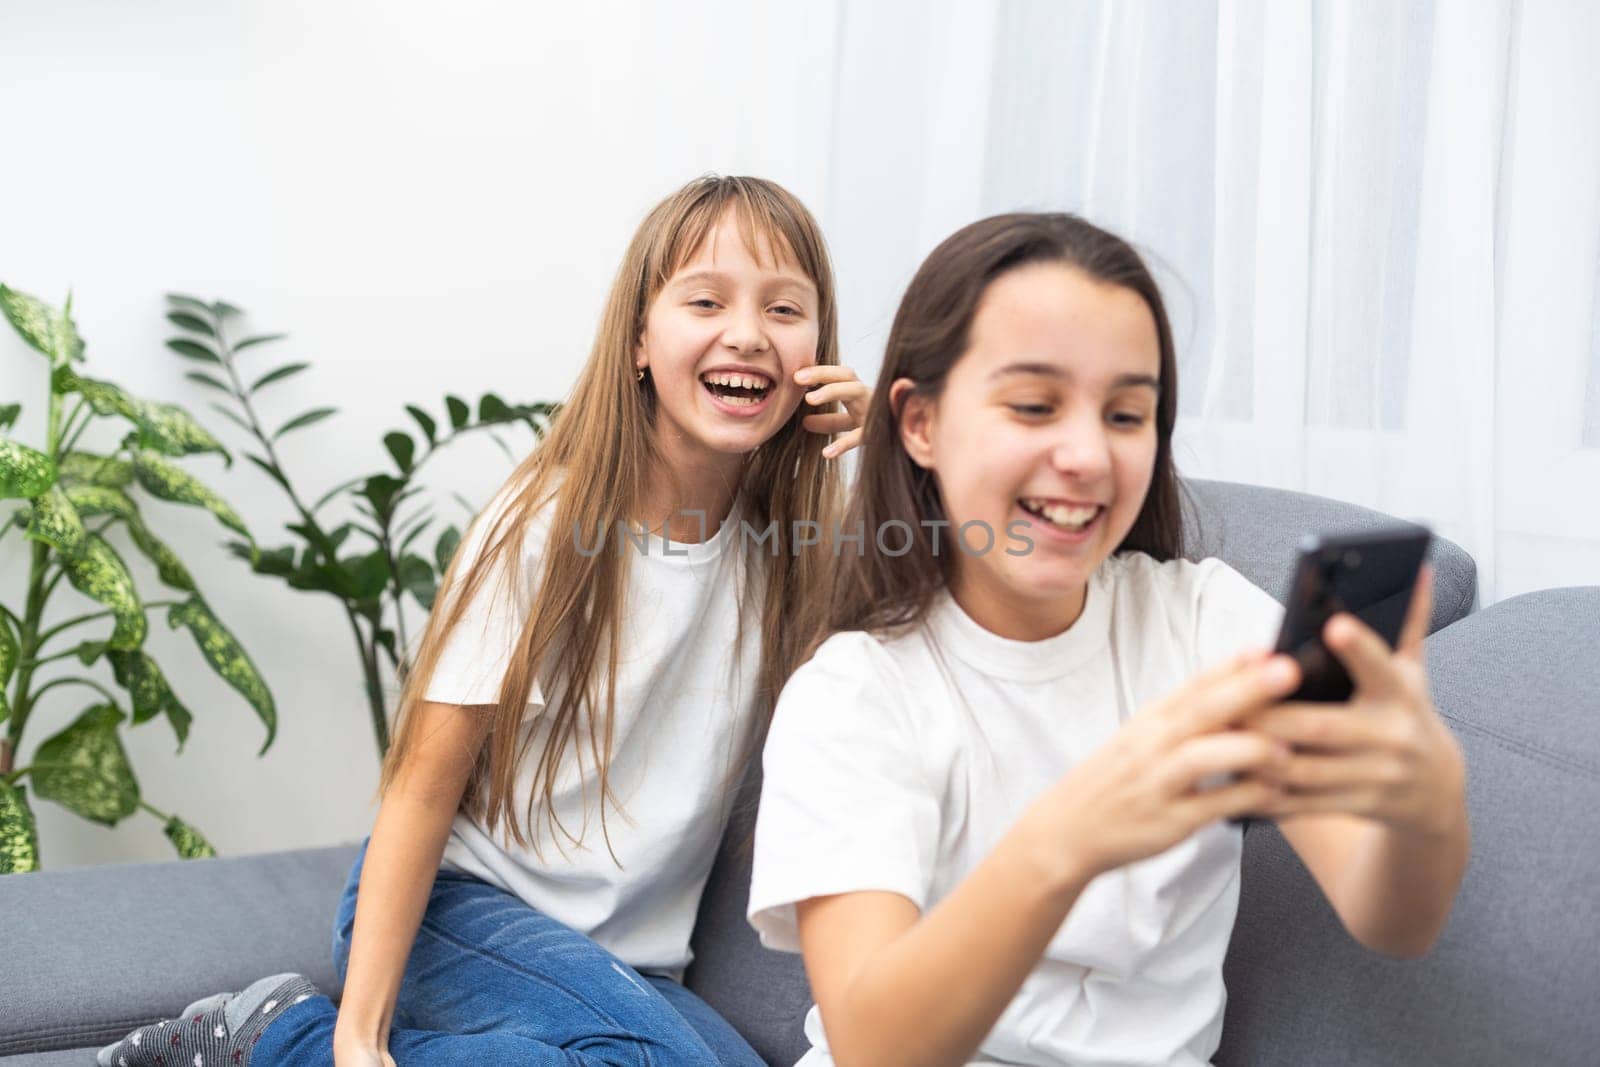 Children play with a mobile phone at home by Andelov13